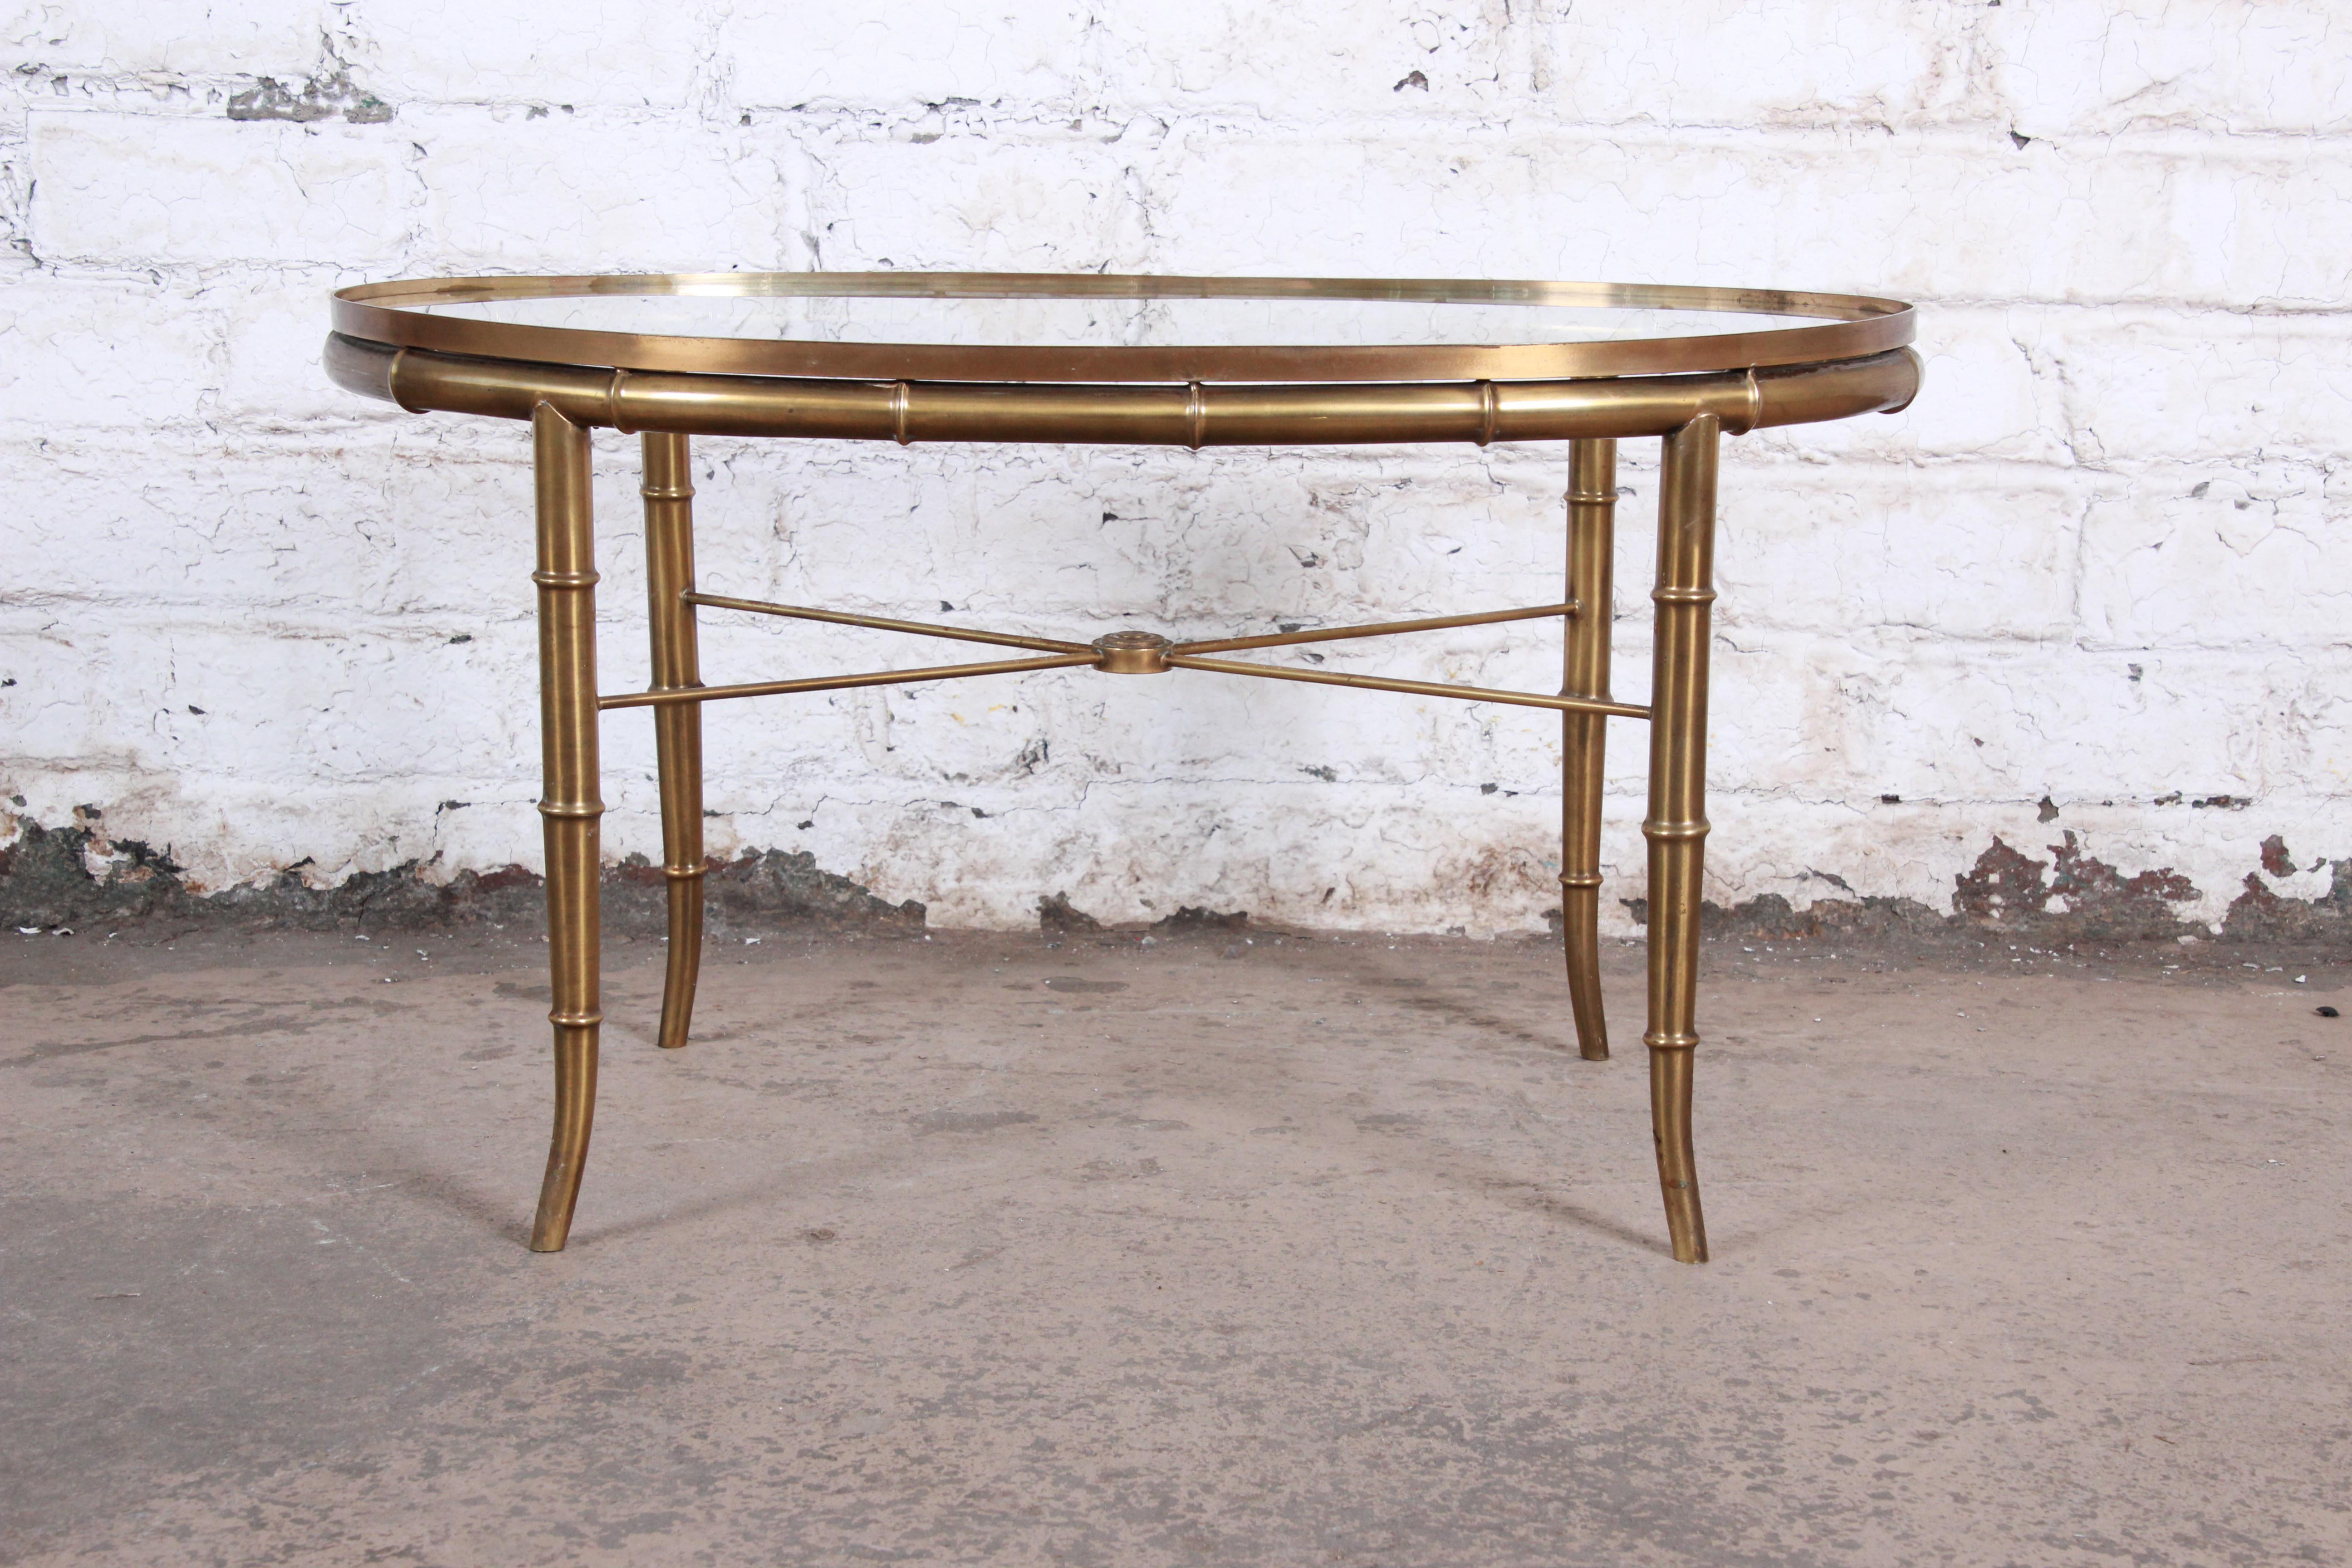 A gorgeous Hollywood Regency Chinoiserie cocktail table or side table by Mastercraft. The table features a stunning faux bamboo brass frame and original glass top. The brass shows beautiful patina from age and use. Overall the table is in very good